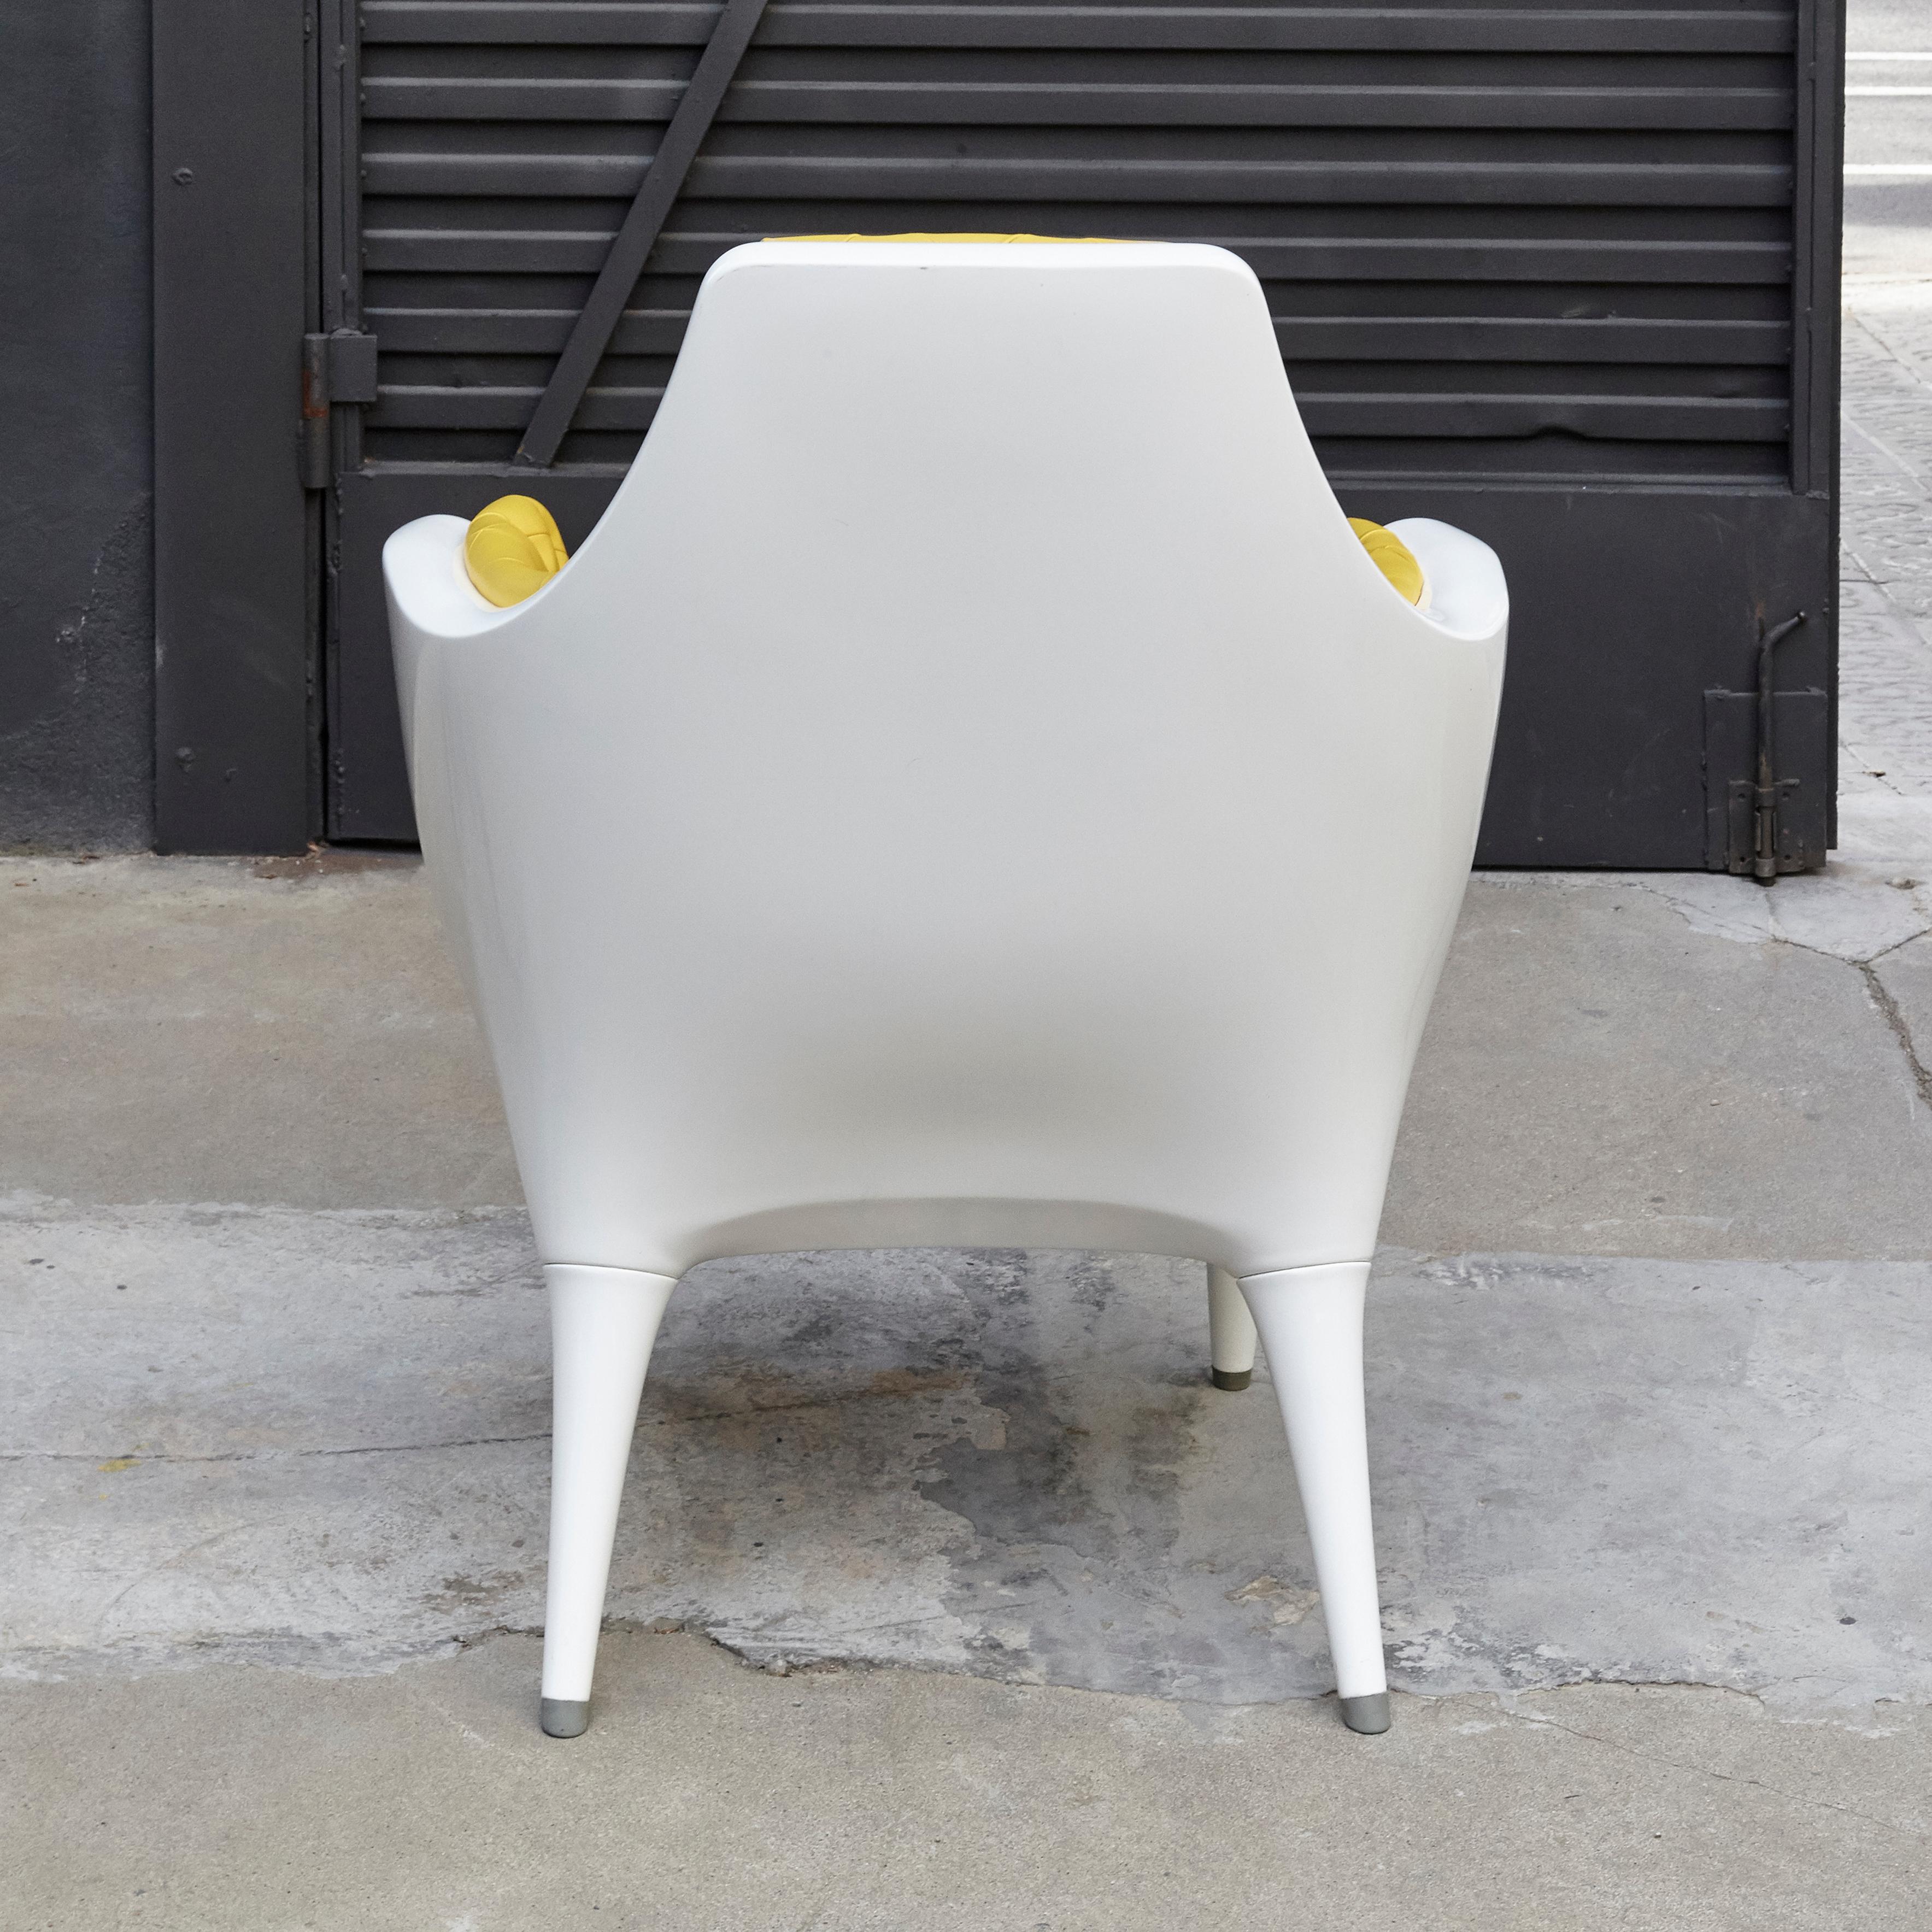 Jaime Hayon Contemporary Showtime Armchair Lacquered White and Yellow In Good Condition For Sale In Barcelona, Barcelona